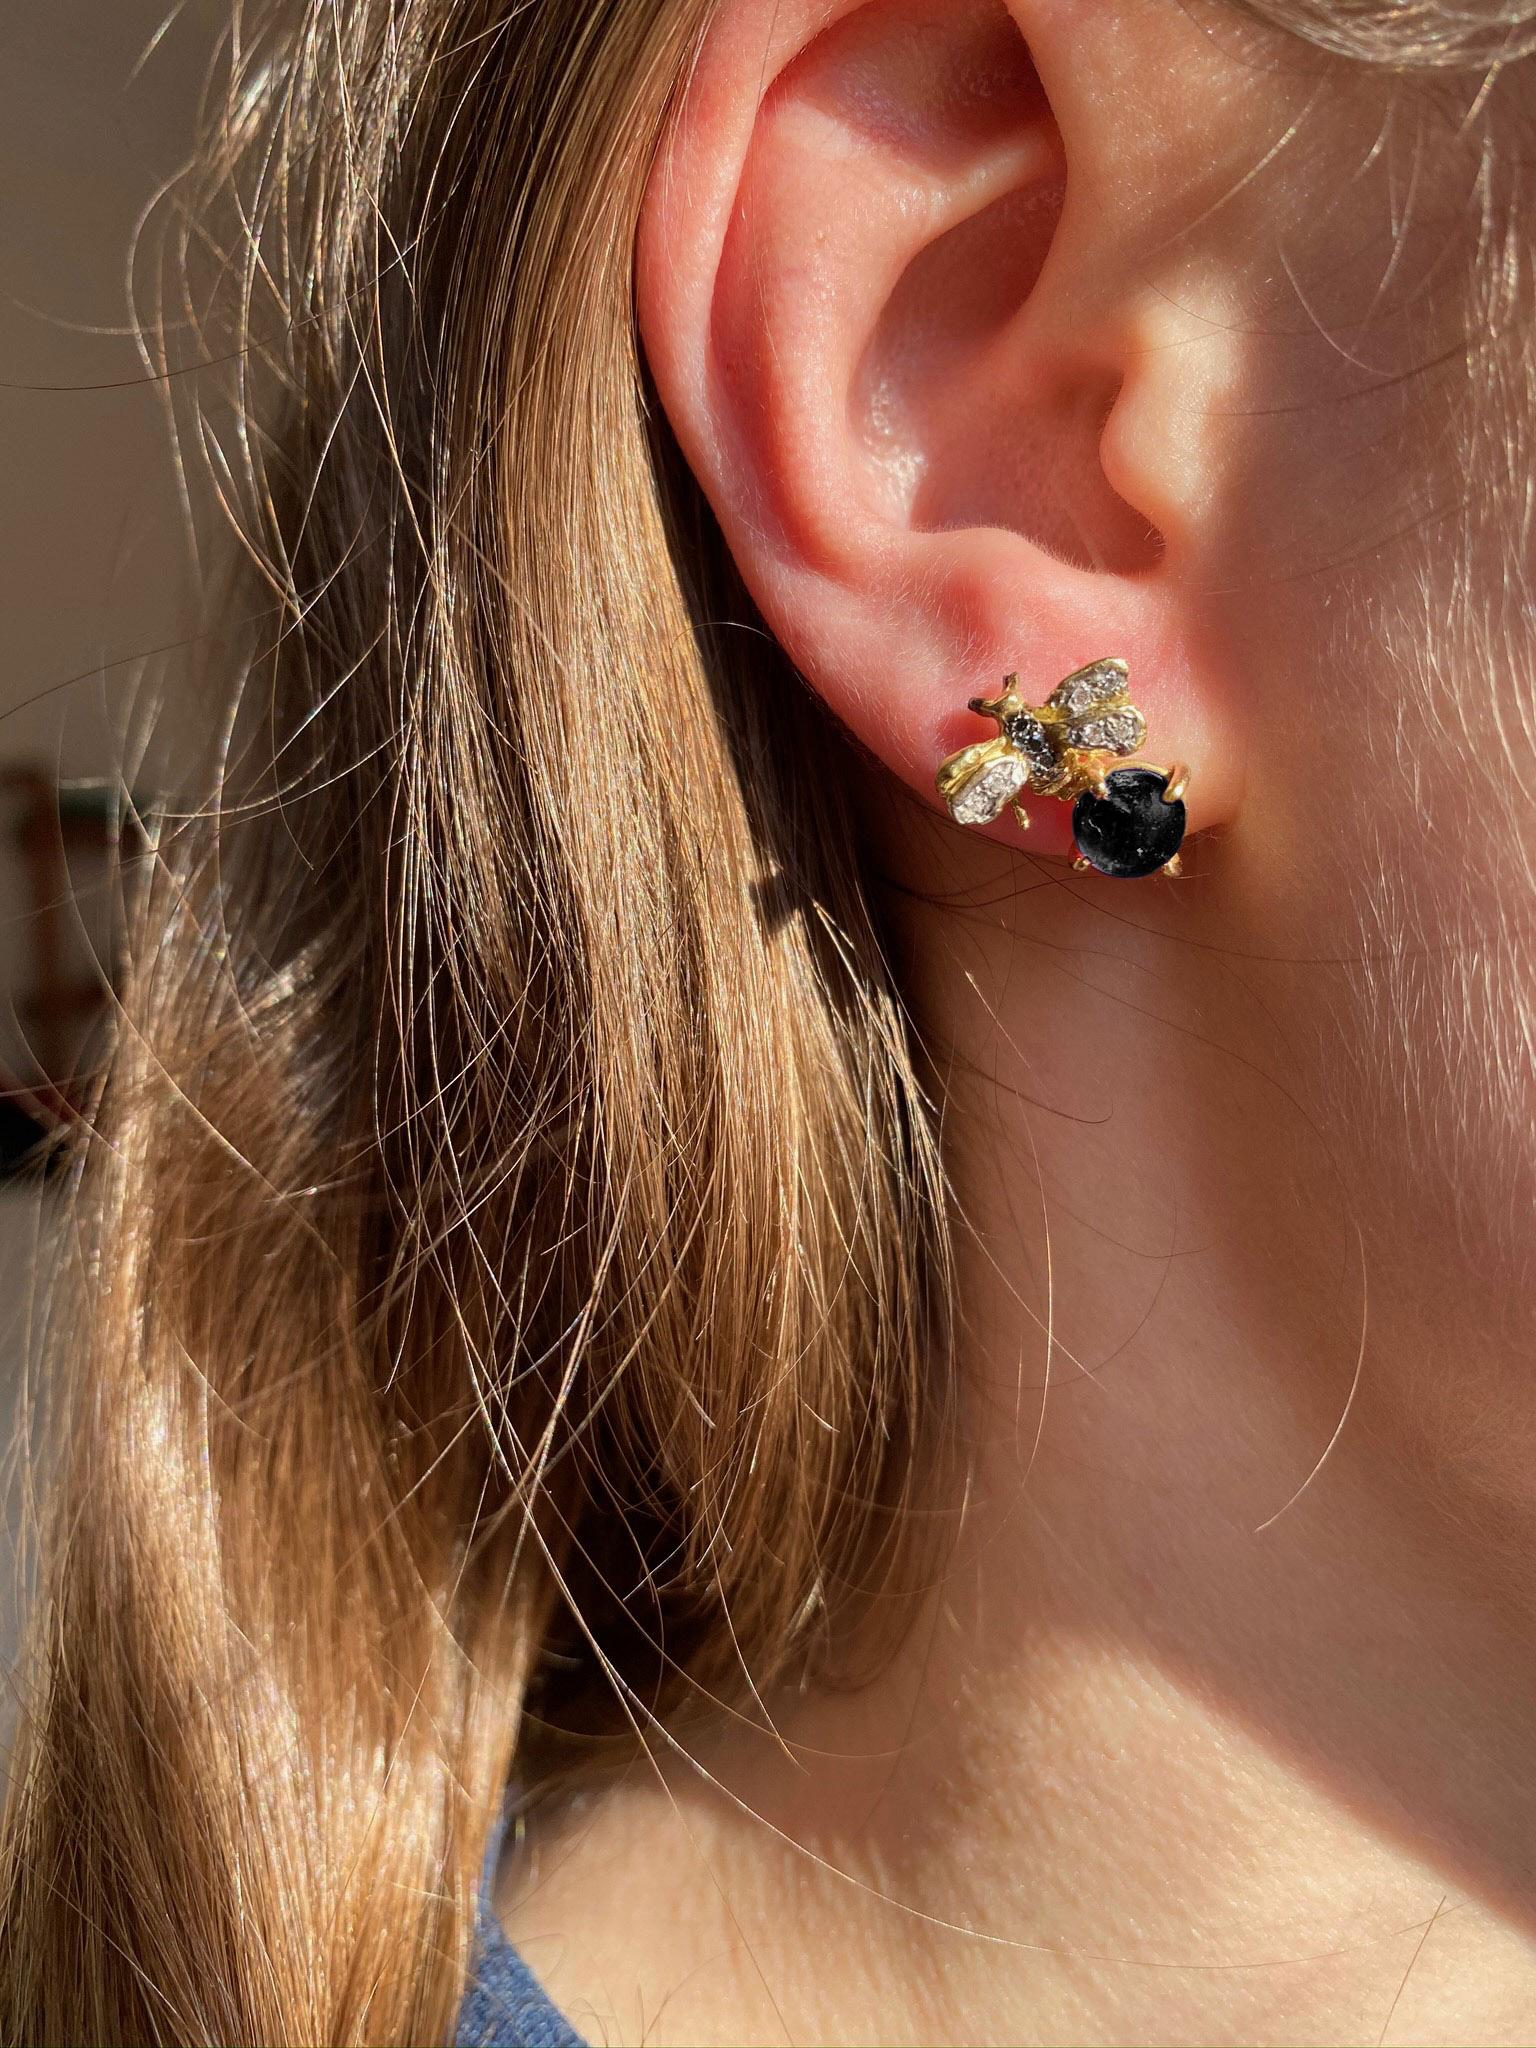 Rossella Ugolini Design Collection, 18 Karat Yellow Gold Black Onyx 0.10 Karats White Diamond 0.06 Karats Black Diamonds Bees Handcrafted Stud Earrings. This collection was born to celebrate a precious creature, essential for our survival as part of